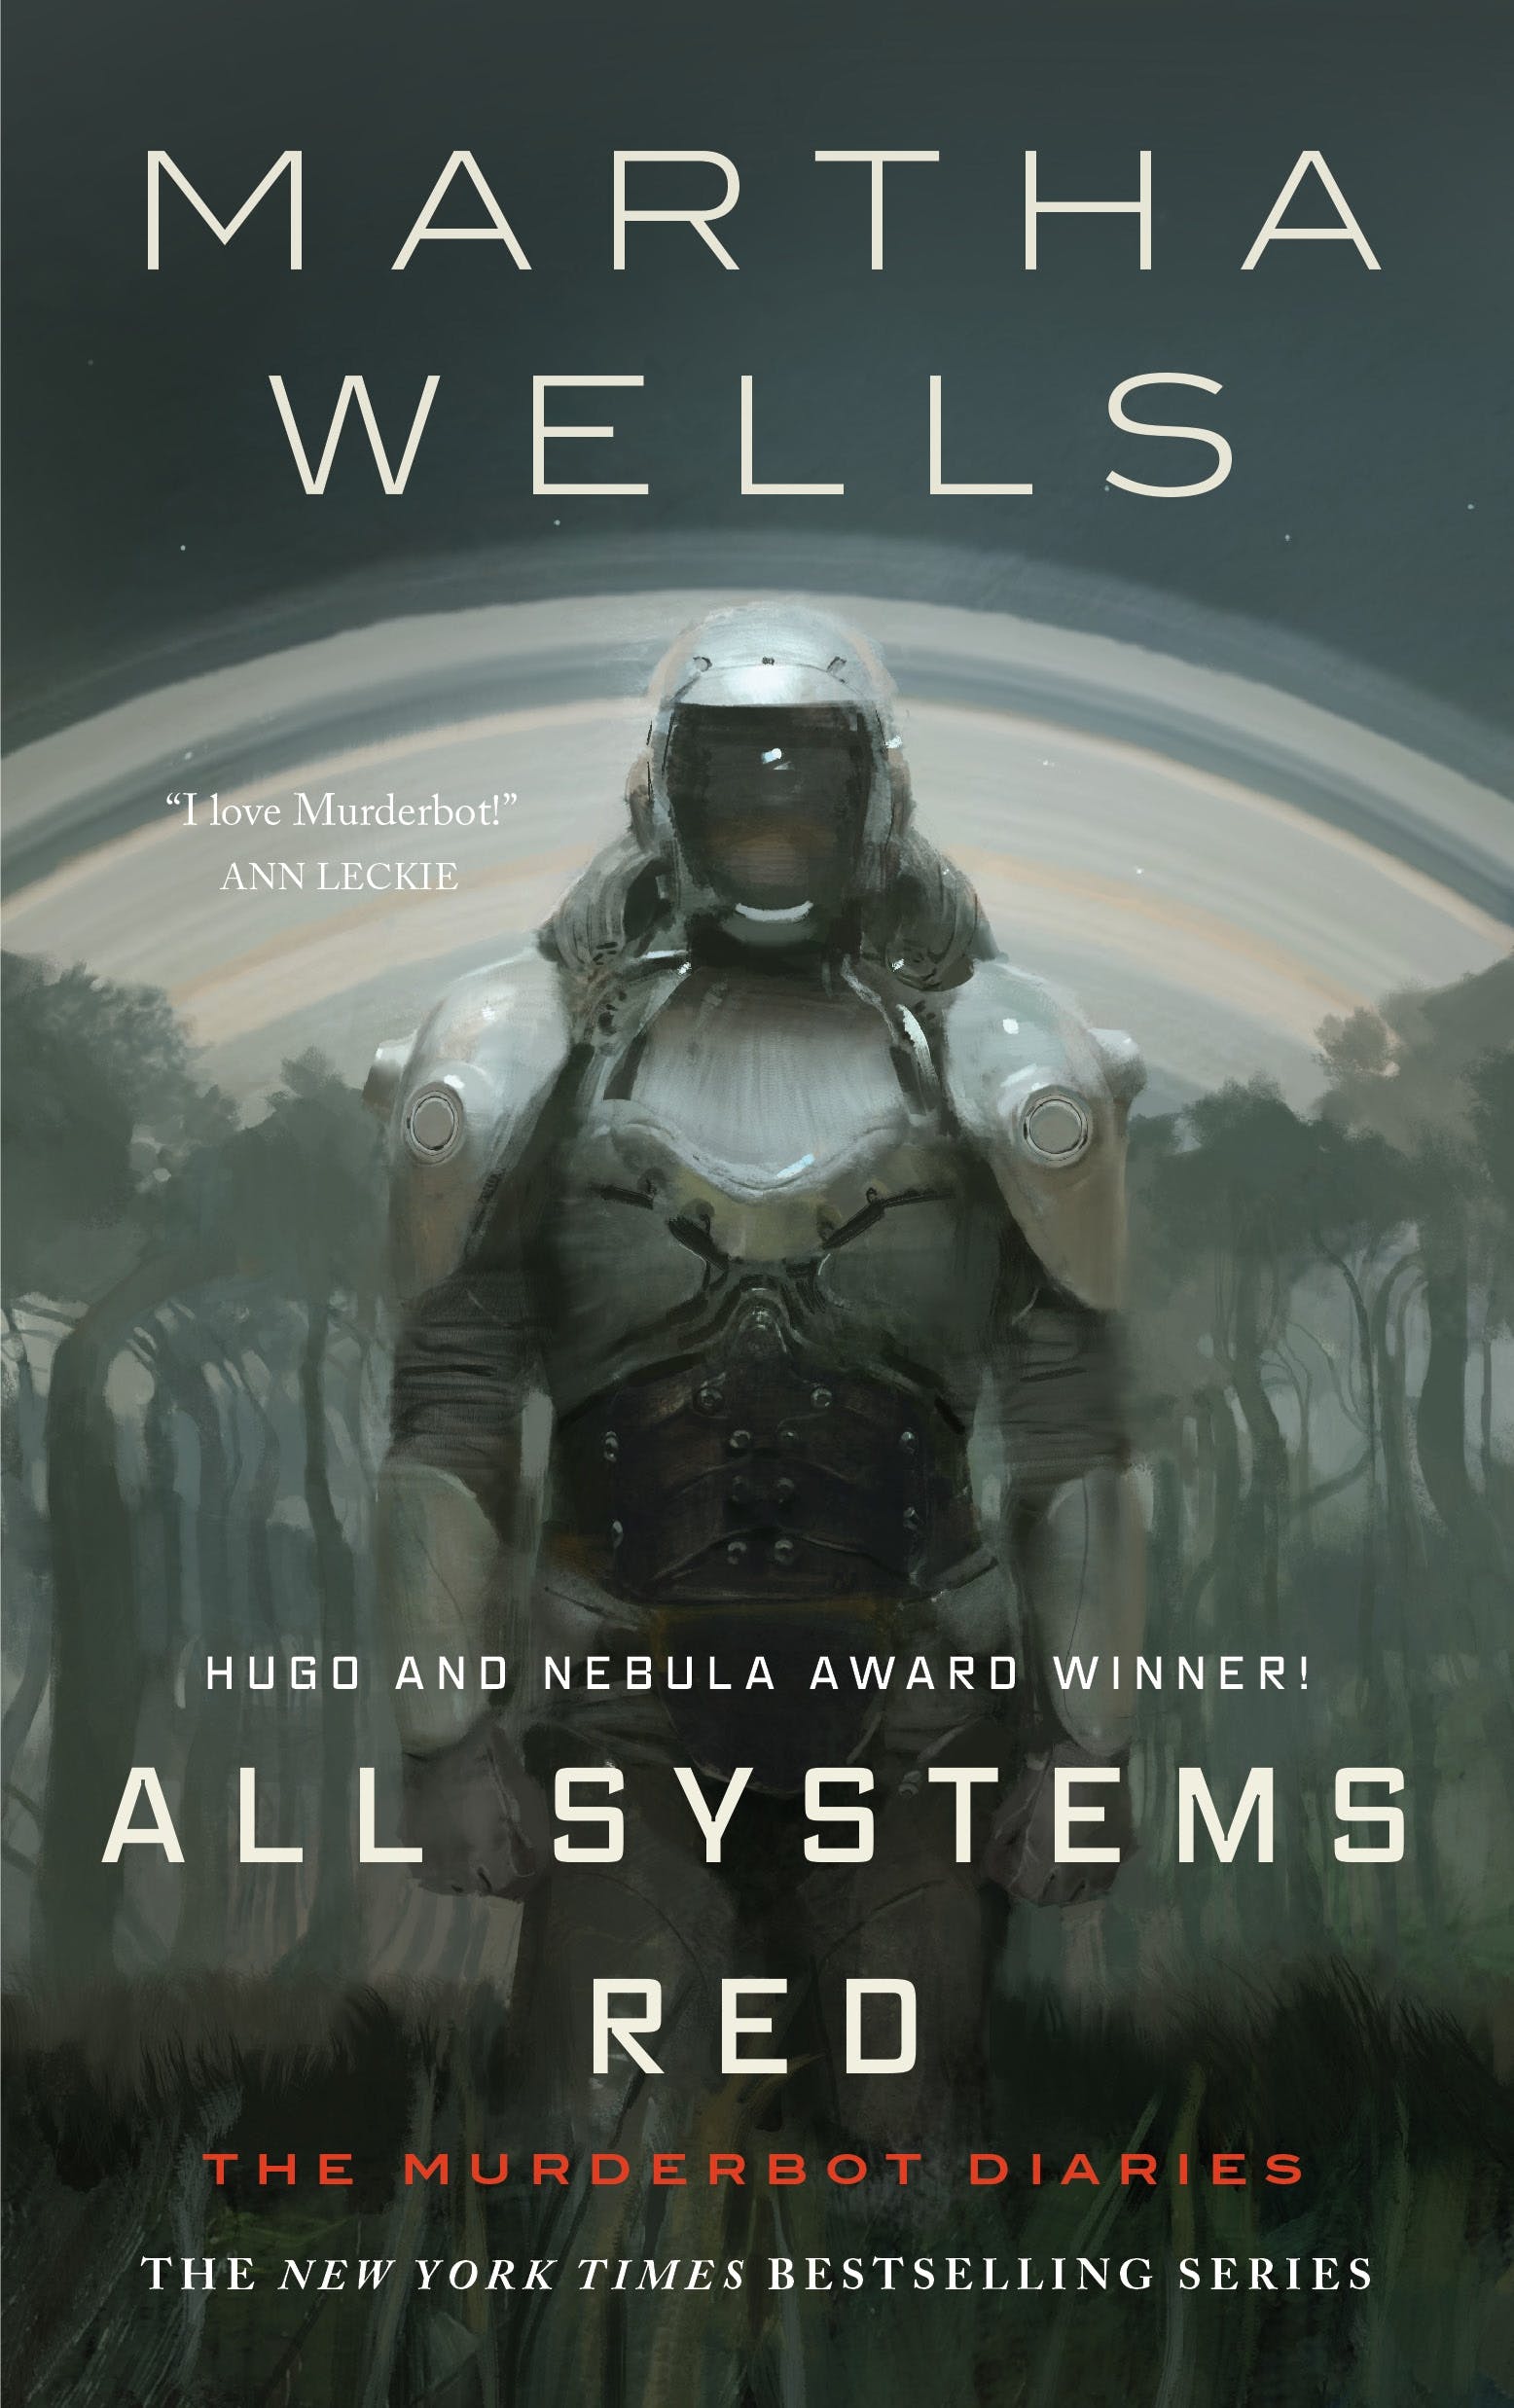 The cover of 'All Systems Red' by Martha Wells, with a grayish digital painting of a glass-faced humanoid robot with trees in the background